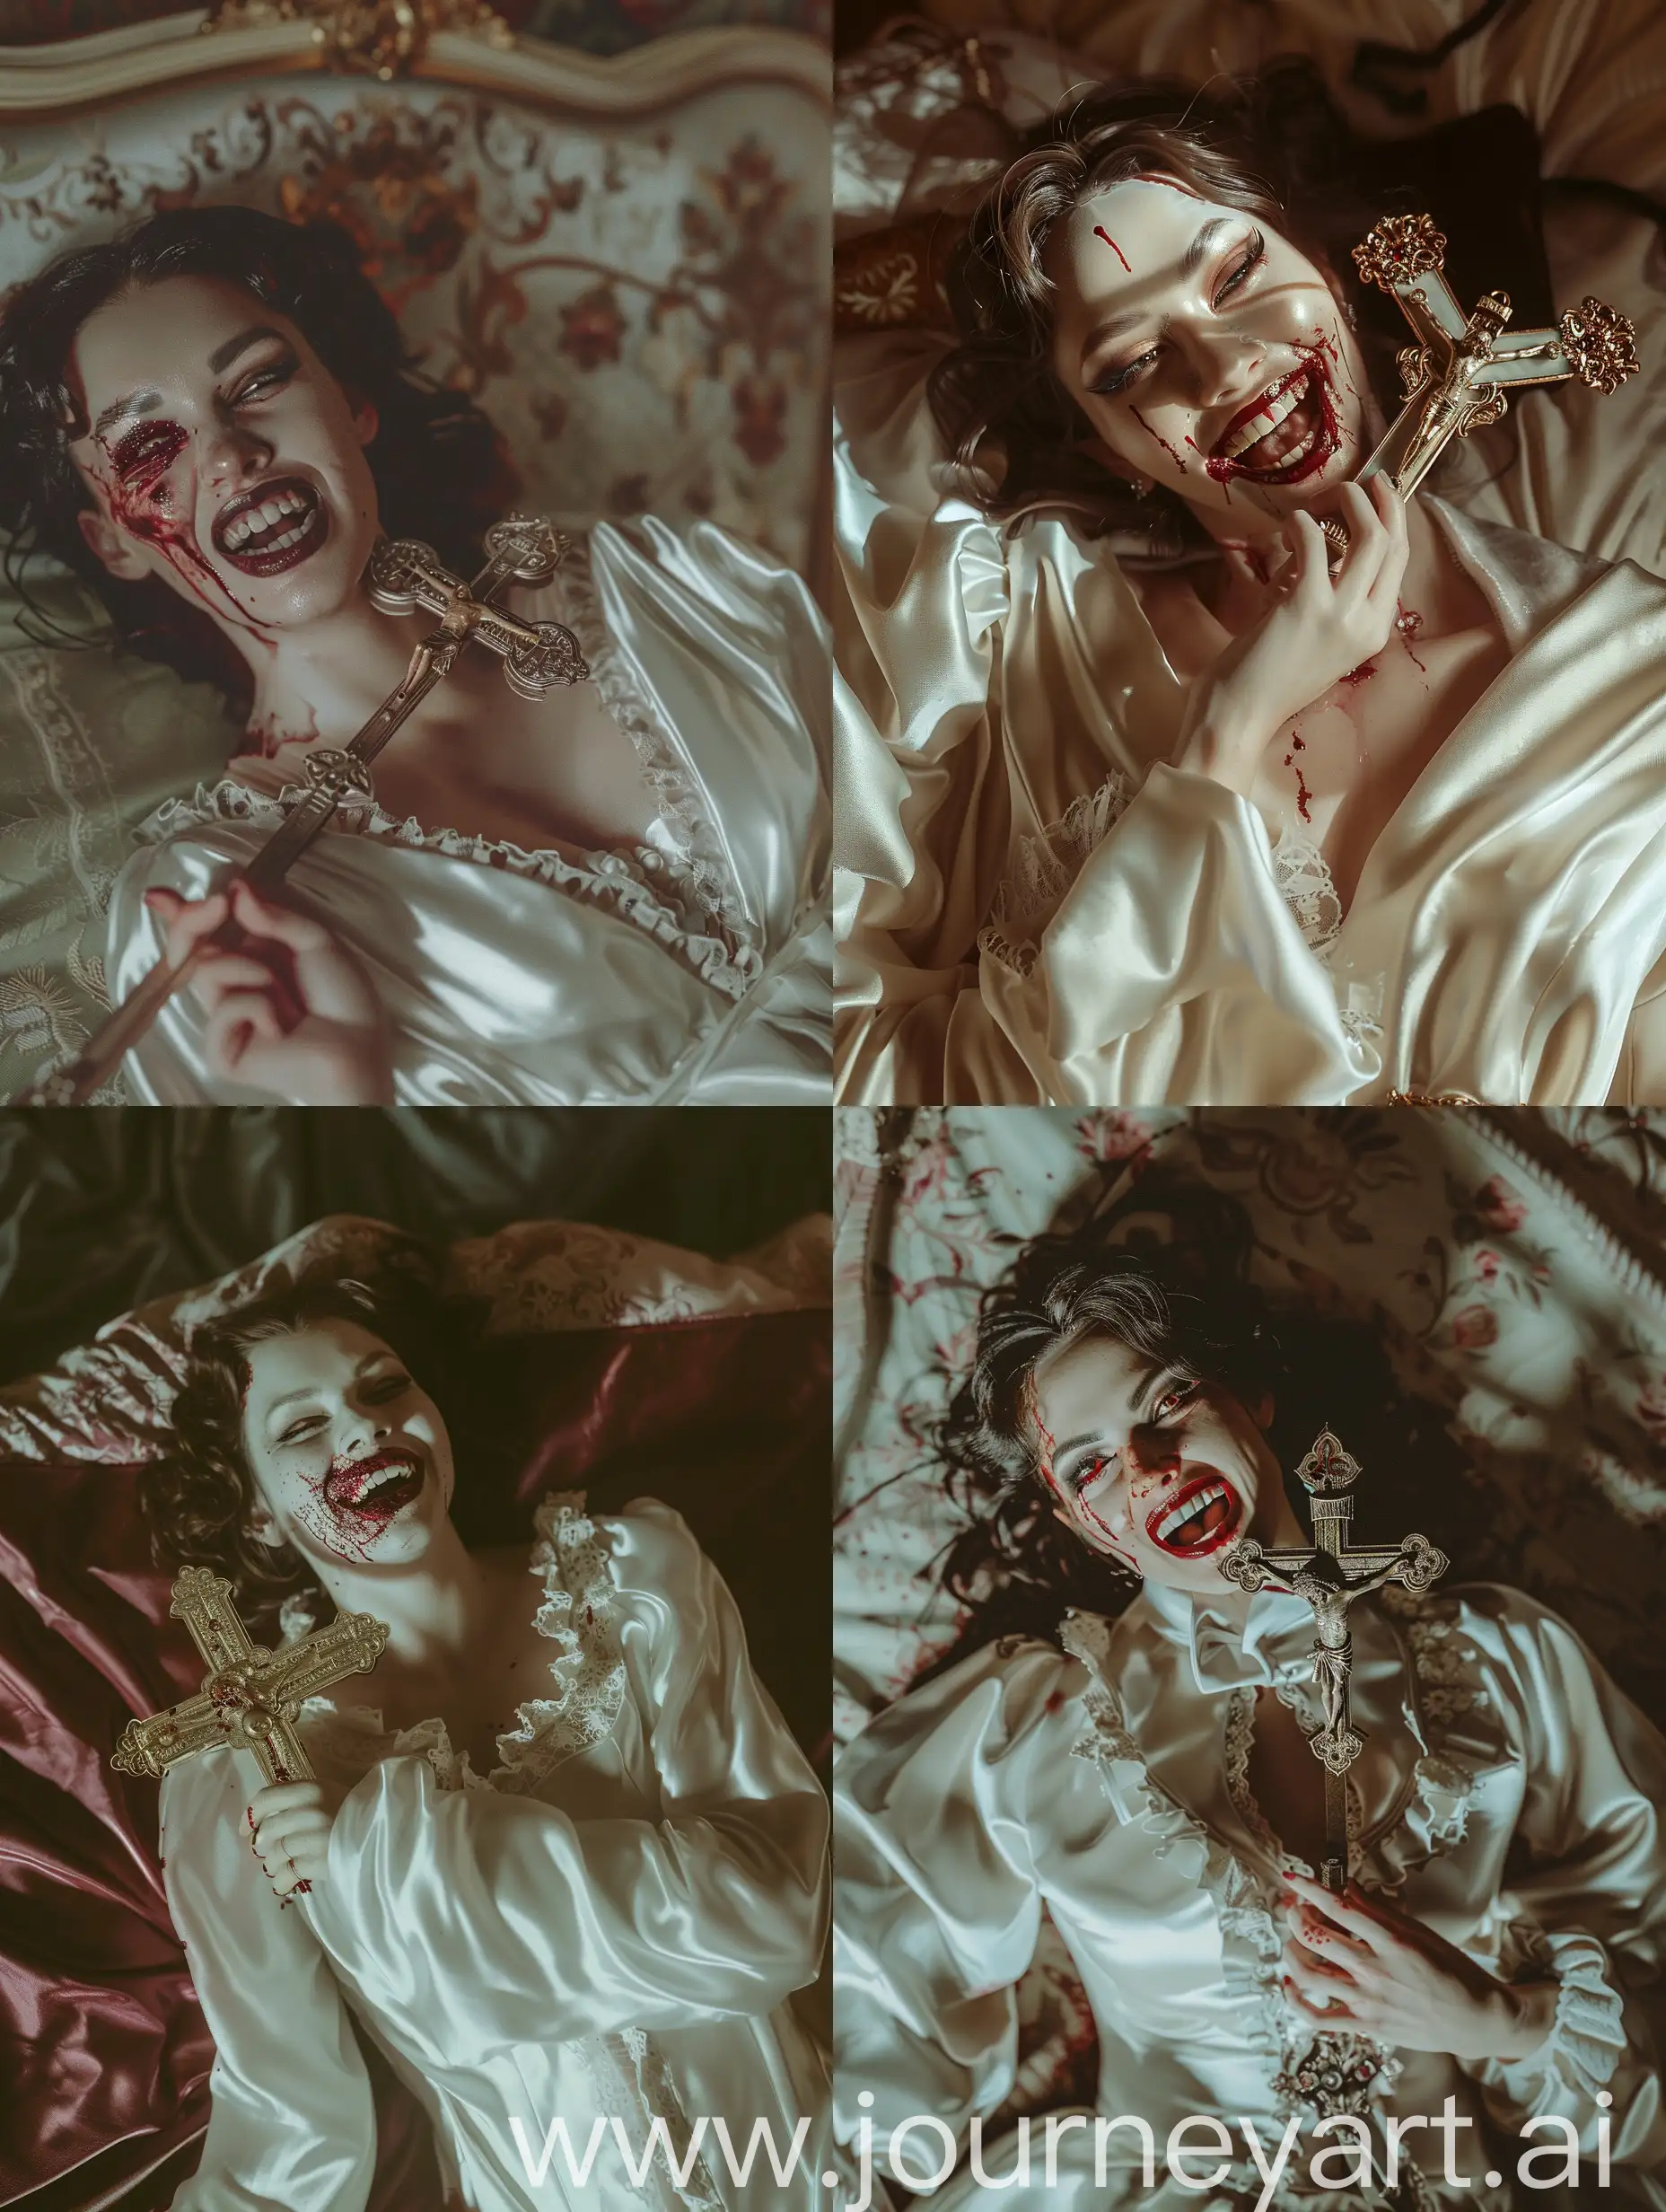 A woman with a sinister grin on her face, wearing a white satin gown, lying on a bed with her face covered in blood, holding an intricately detailed crucifix in their hand, in the style of gothic horror, saturated, dark horror, taken on provia